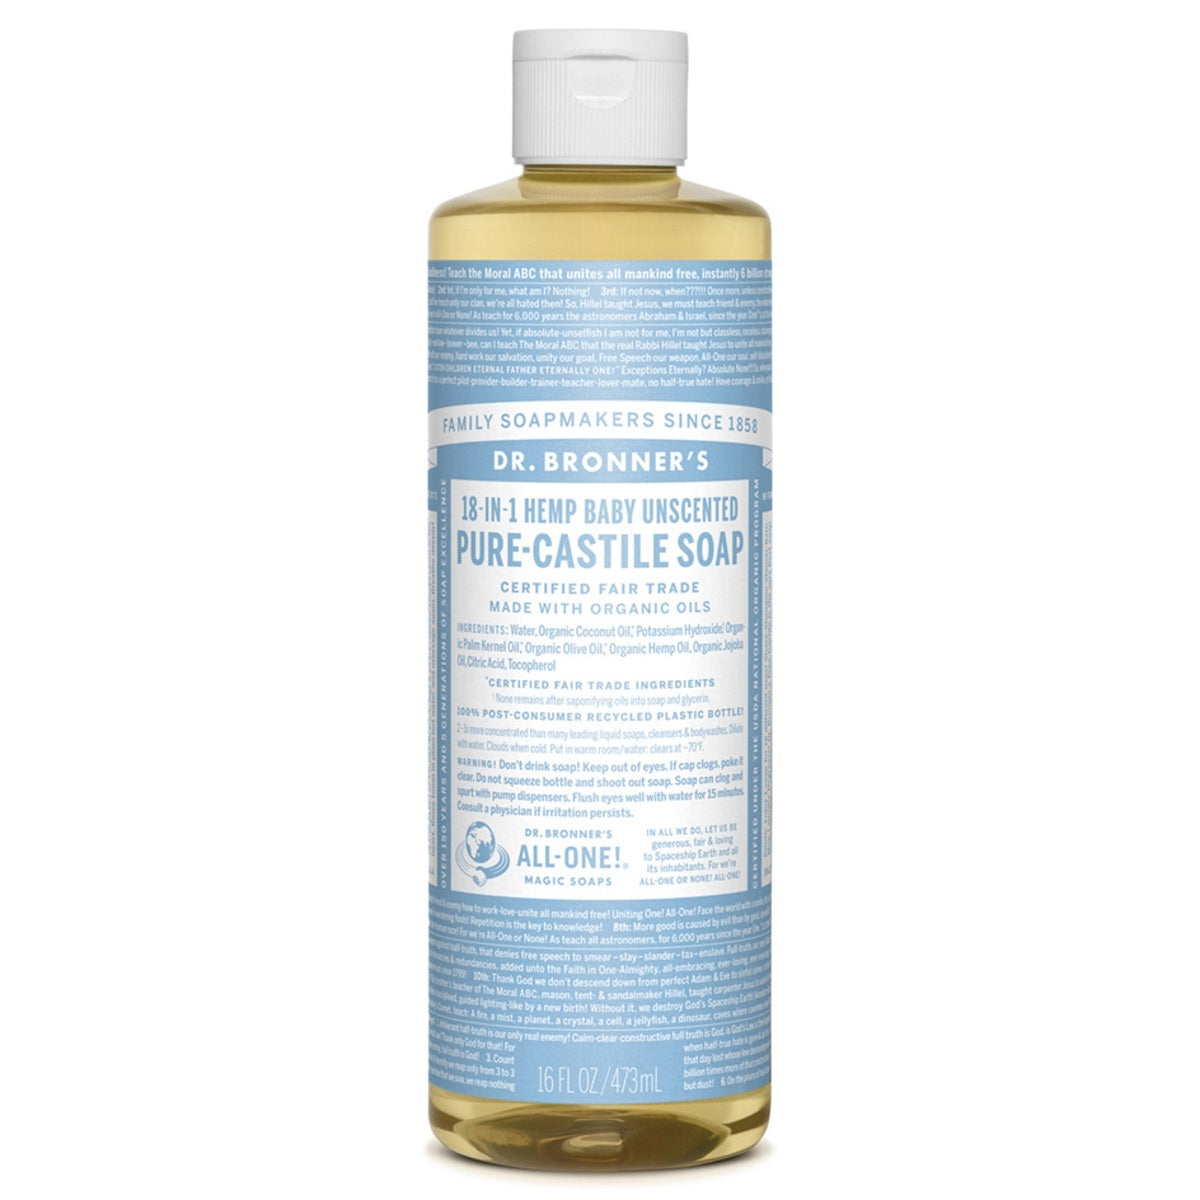 Primary image of Baby Unscented Castile Liquid Soap